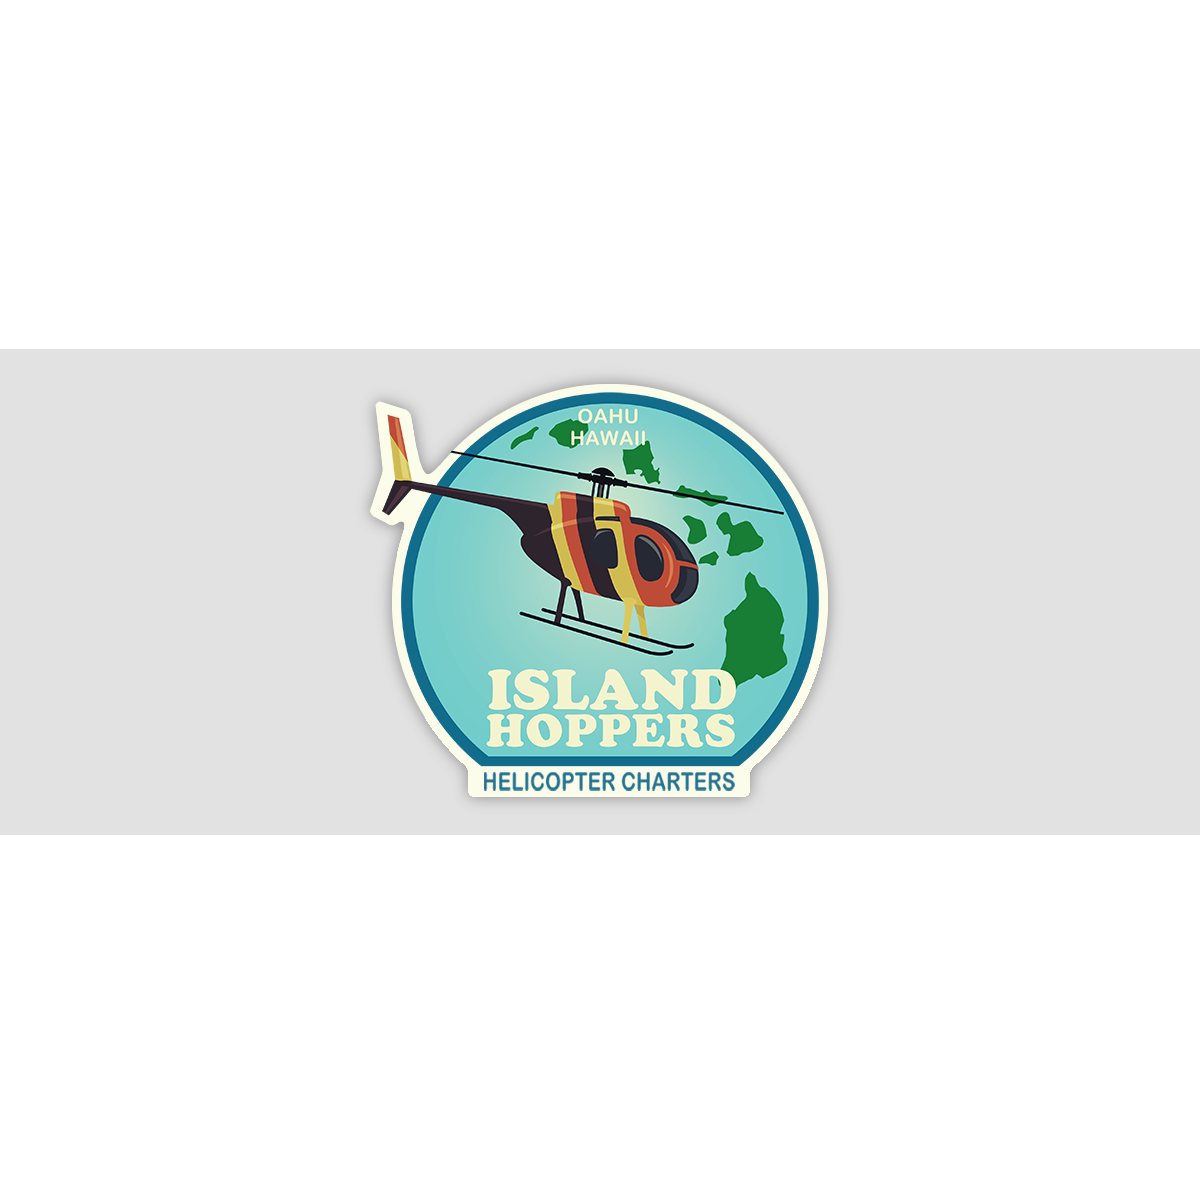 ISLAND HOPPERS HELICOPTER CHARTERS Sticker